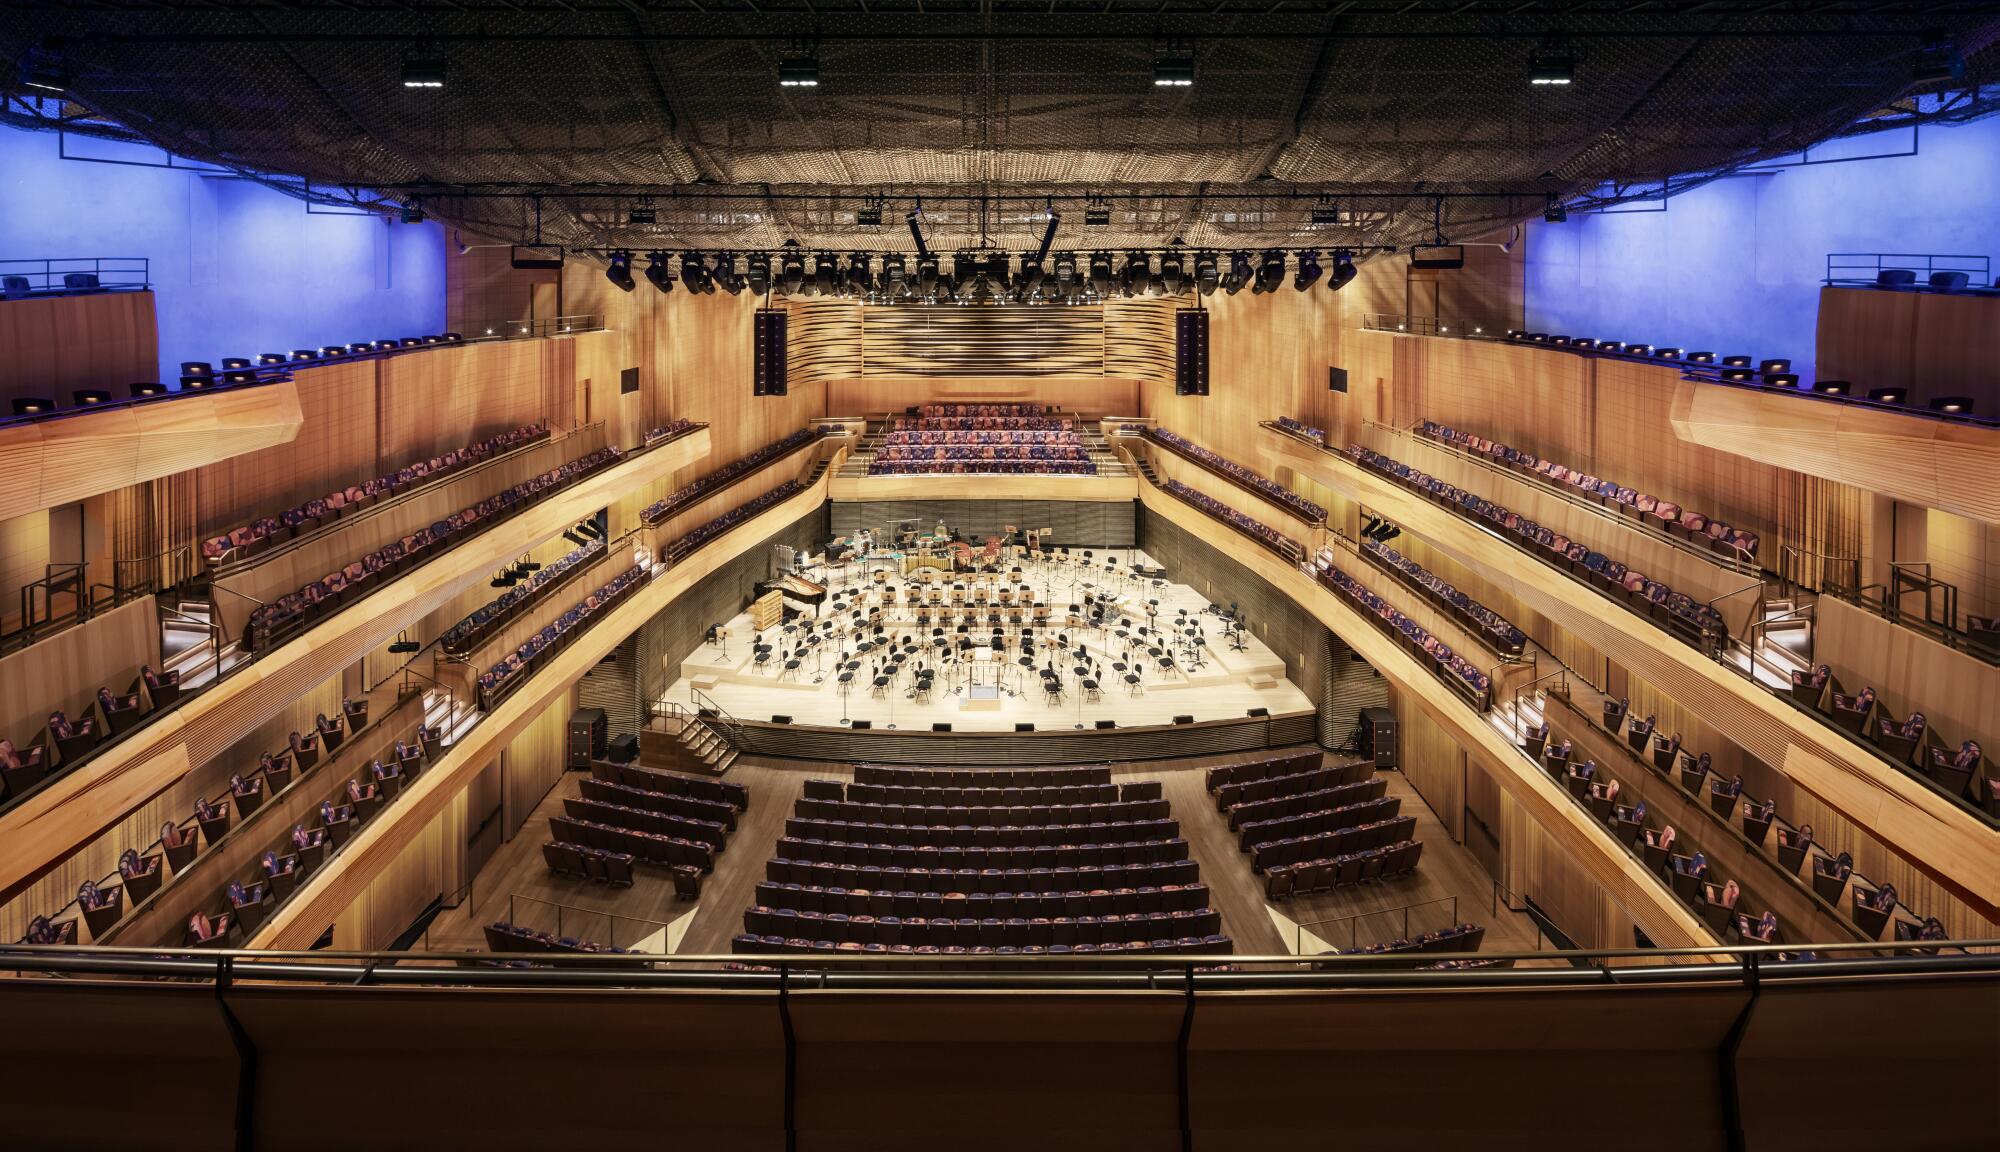 A concert hall clad in blond wood with a bright maple stage is seen from an upper tier.